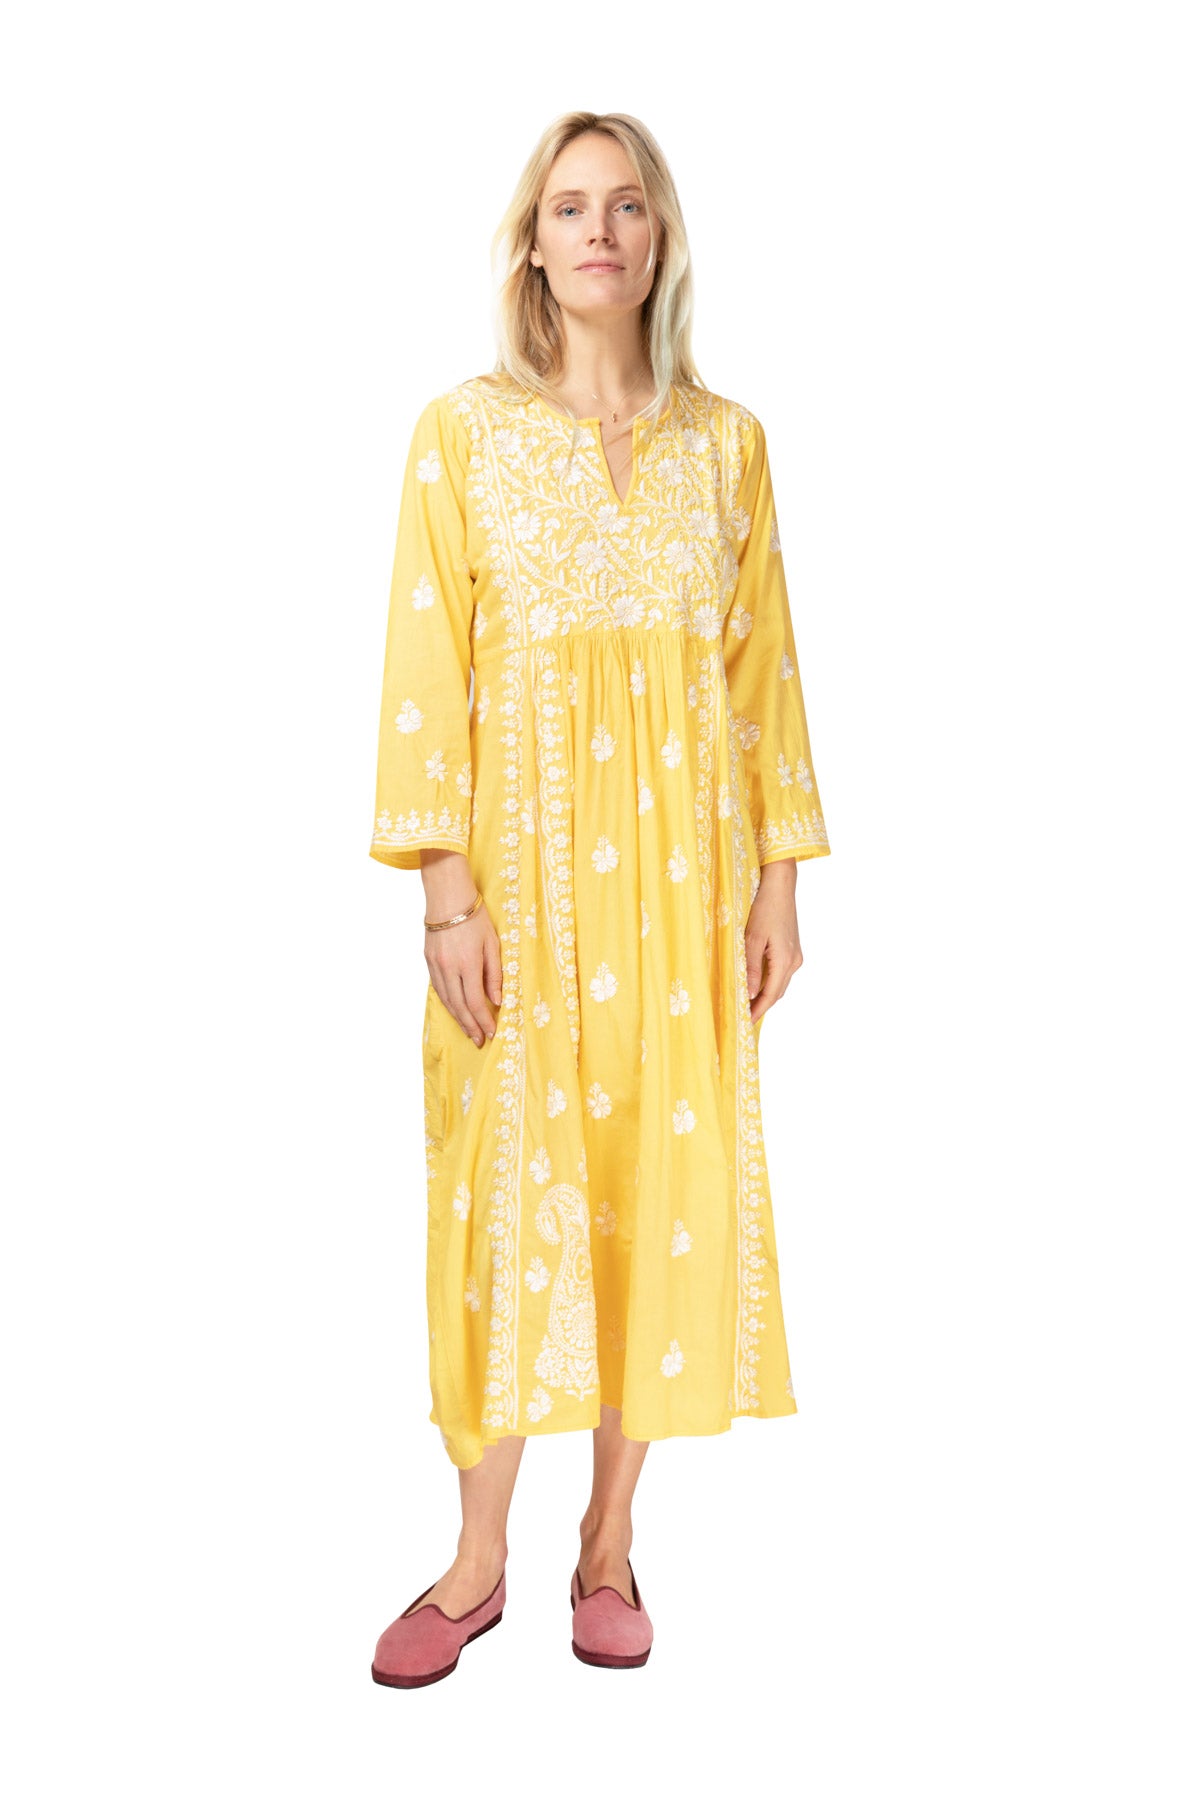 Cotton Embroidered Dress - Yellow